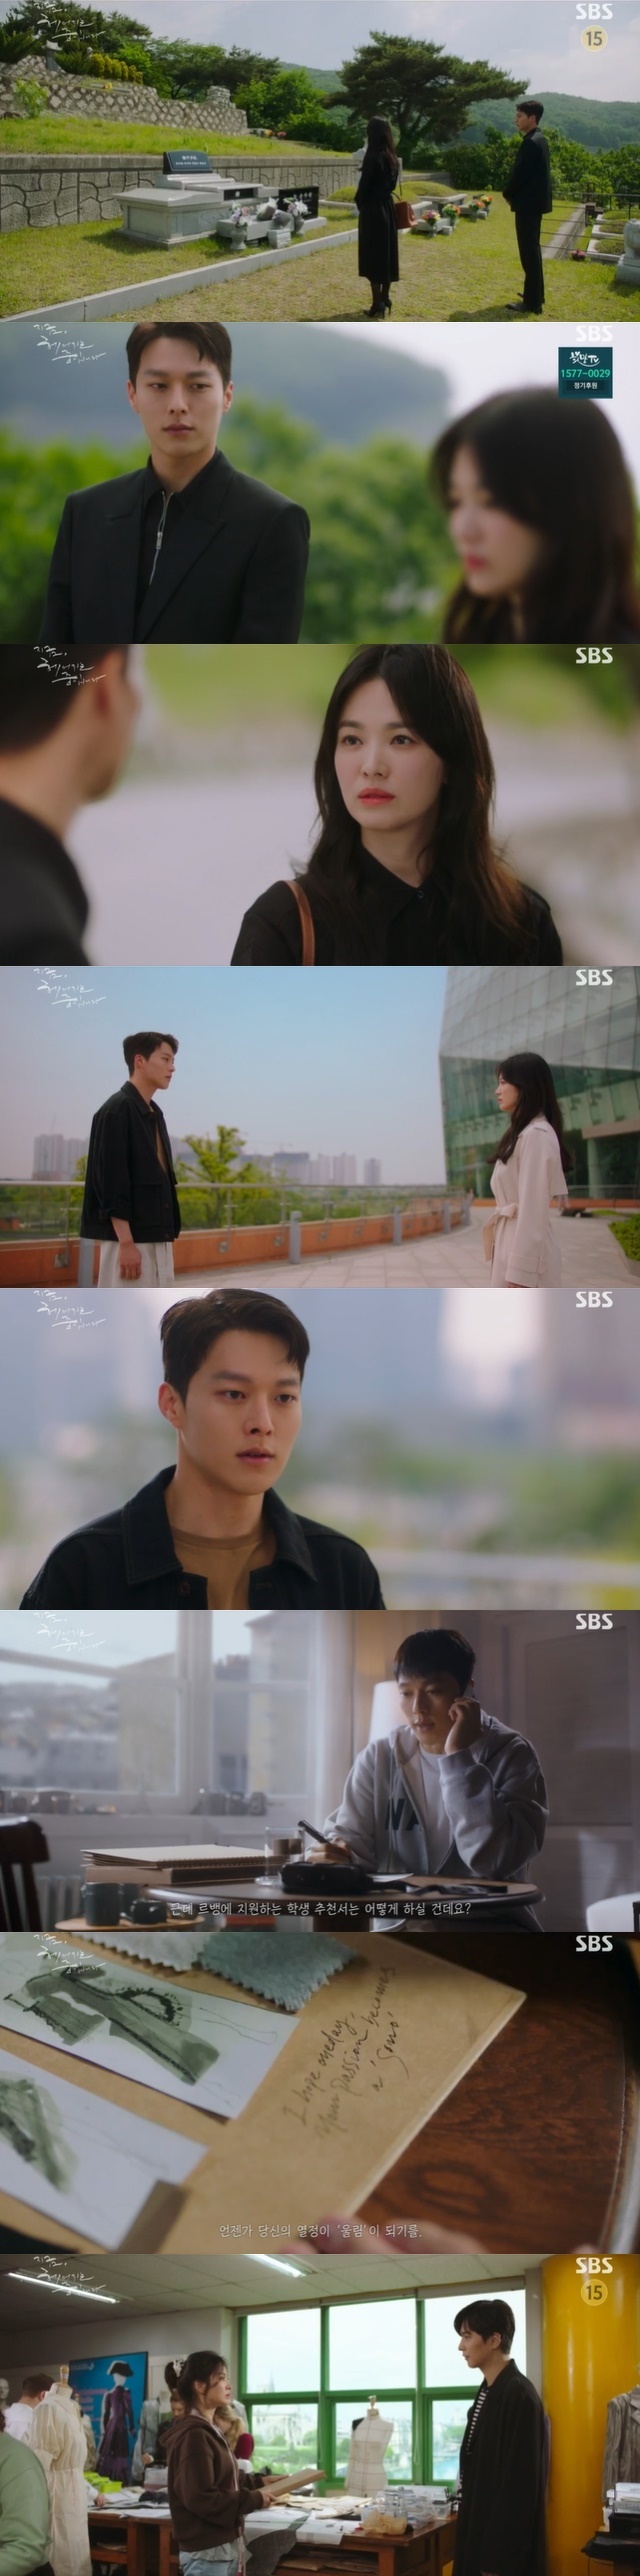 Jang Ki-yong goes straight for Song Hye-kyoIn the 4th episode of SBSs Golden Earth Drama, Now, Im Breaking Up (playplayplayed by Jane, directed by Lee Gil-bok), which was broadcast on November 20th, Ha Young-eun (Song Hye-kyo), who is struggling to know the death of his ex-lover Yoon Soo-wan (Shin Dong-wook), was portrayed.On this day, Ha Young-eun told Yoon Jae-guk (Jang Ki-yong)  (Yoon Soo-wans brother) and my brother died 10 years ago.My brother was in a complicated feeling when he heard the Confessions Agnaldo Timóteo died 10 years ago.Ha Young-eun, who has been hanging on his career only after giving up his love after Yoon Soo-wans diving breakup, felt a sense of futility about what he had lived so hard to forget and what he was resenting.Ha Young-eun, who had chosen to break through the copy of clothes last time, was disastrous.As a result, Sono, who is headed by Ha Young-eun, was pushed to the location of the store in the Hills Department Store, and Hwang (Ju Jin-mo) showed nuances that Ha Young-eun seemed to organize the Sono that he had been selling for 10 years.Nevertheless, Ha Young-eun, who did not cry, could shed tears as much as he could after meeting his friend Jeon Mi-sook (Park Hyo-joo).Ha Young-eun, who ate dumplings routinely with Jeon Mi-sook, said, Unsook, Im going over this? He died. Agnaldo Timóteo died coming to me.Jeon Mi-sook, who knows all of Ha Young-euns stories, just gave Ha Young-eun a chance.When Ha Young returned home, he began to congregate in many ways, thinking, Why did I live with all this, why did I not throw it away and just stack it all up?Ha Young recalled 10 years ago to his lover Yoon Soo-wan, Wherever I am, the first Brand I make will be Sono. He recalled the meaning of Sono to himself and the meaning of Yoon Su-wan.At the same time, Yoon Jae-guk still has not abandoned his mind about Ha Young-eun. Yoon Jae-guk said that he has a recent meeting with his mother, Min-sa (Cha Hwa-yeon), during a meal.I am waiting now. I will say hello when I can feel his heart. Ha Young-euns phone call came to Yoon Jae-guk. Ha Young-eun, who had been organizing the decade, asked Yoon Jae-guk, Where is Su-wan?So, Ha Young-eun and Yoon Jae-guk found the tomb of Yoon Su-wan.Looking at Ha Young-eun, Yoon Jae-kook recalled a conversation he had with Yoon Soo-wan during his lifetime. At that time, Yoon Su-wan decided to break up with Ha Young-eun ahead of Seoul. My mother will not allow it.It is right to let him go rather than to go through it. At this time, Yoon Jae-guk said, If you love, you will stay with you, or leaving is a relationship of people.So do not dwell on many things, he advised, Let her Choices if she breaks up, if she loves. After that, Yoon Su-wan died while heading to Ha Young-eun.After completing his greeting with Yoon Soo-wa, Ha Young-eun asked Yoon Jae-guk, Why did Su-wan talk? Yoon Jae-guk said, I do not think I will pass by.However, Ha Young-eun said, It is love that ended in two months (Yoon Soo-wan and I), but time is not the size of the mind.It was two months that meant enough to change my life at that time, he said. We should not do anything now. Ha Young-eun said, I can not ignore that Suwan is my brother.I came with Yoon Soo-wans brother, not Yoo Jae-guk today. Thank you. I will go alone. Nevertheless, Yoon did not give up on Ha Young-eun, and he returned to his daily life and decided to carry the Sono Brand.Yoon said, You can always Choices what were going to do or keep meeting. But answer this one. Did you miss me? Just answer one.Did you miss me? asked the straight-up, with heartfelt Confessions soon following: I missed you.